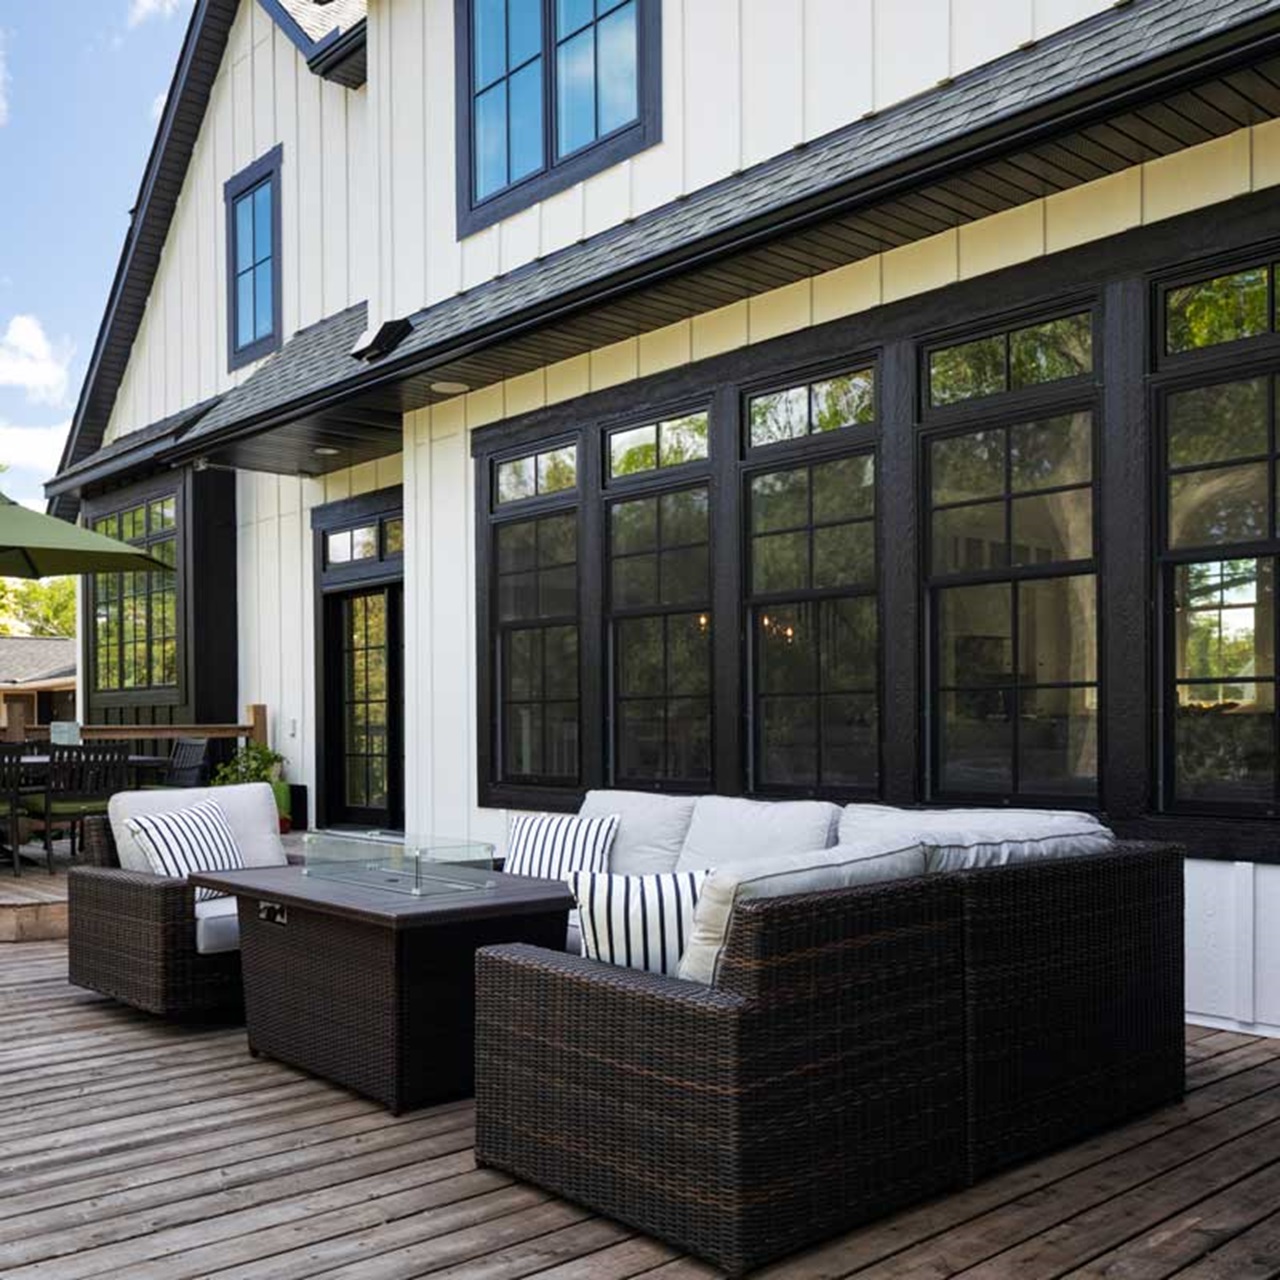 Wood patio with outdoor sectional in front of black marvin elevate windows